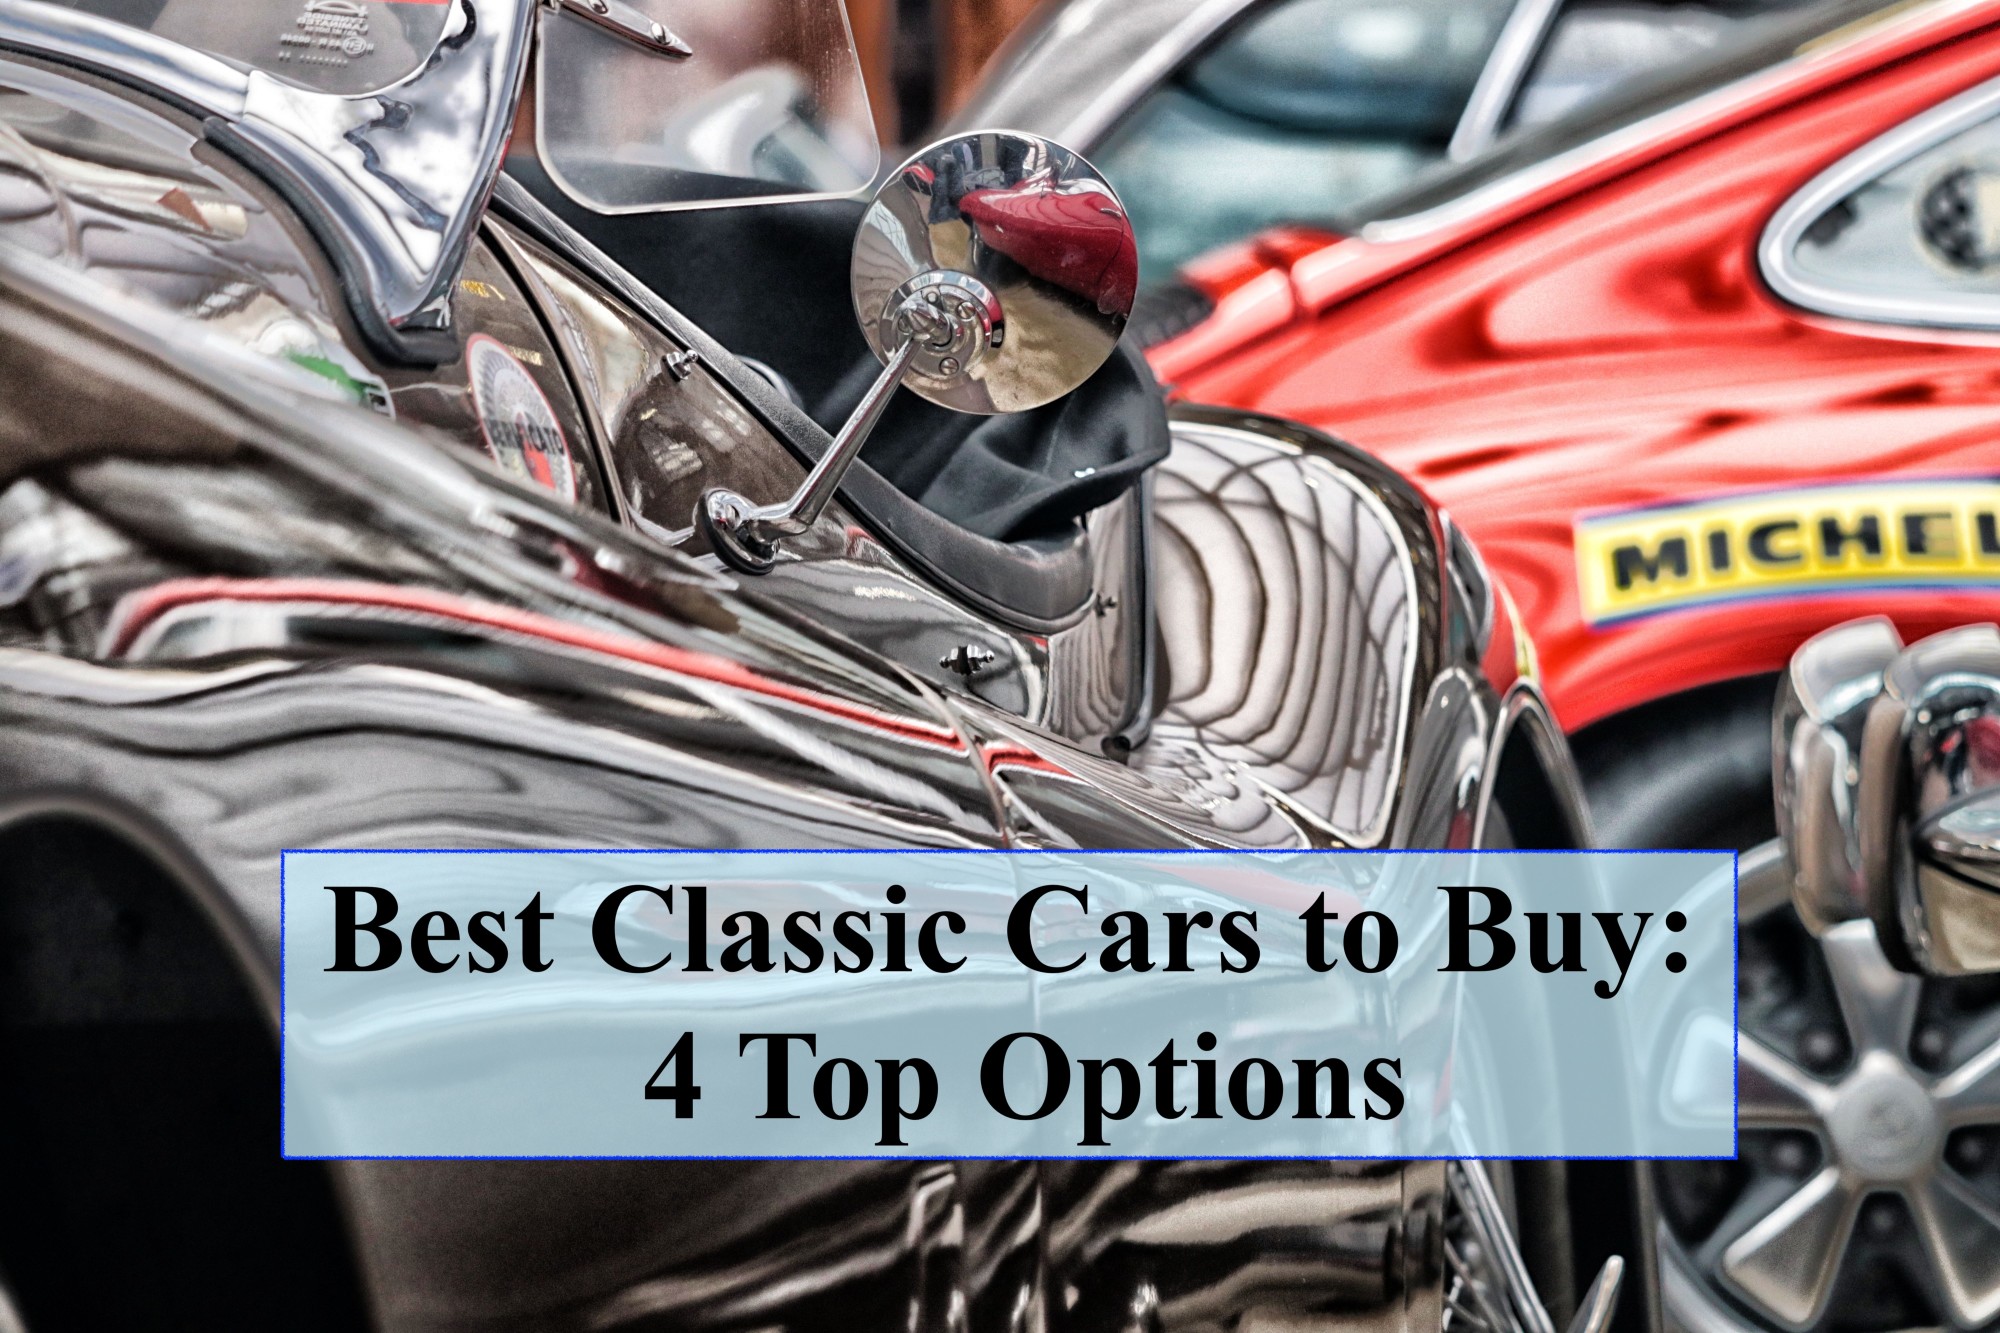 Buying Classic Cars